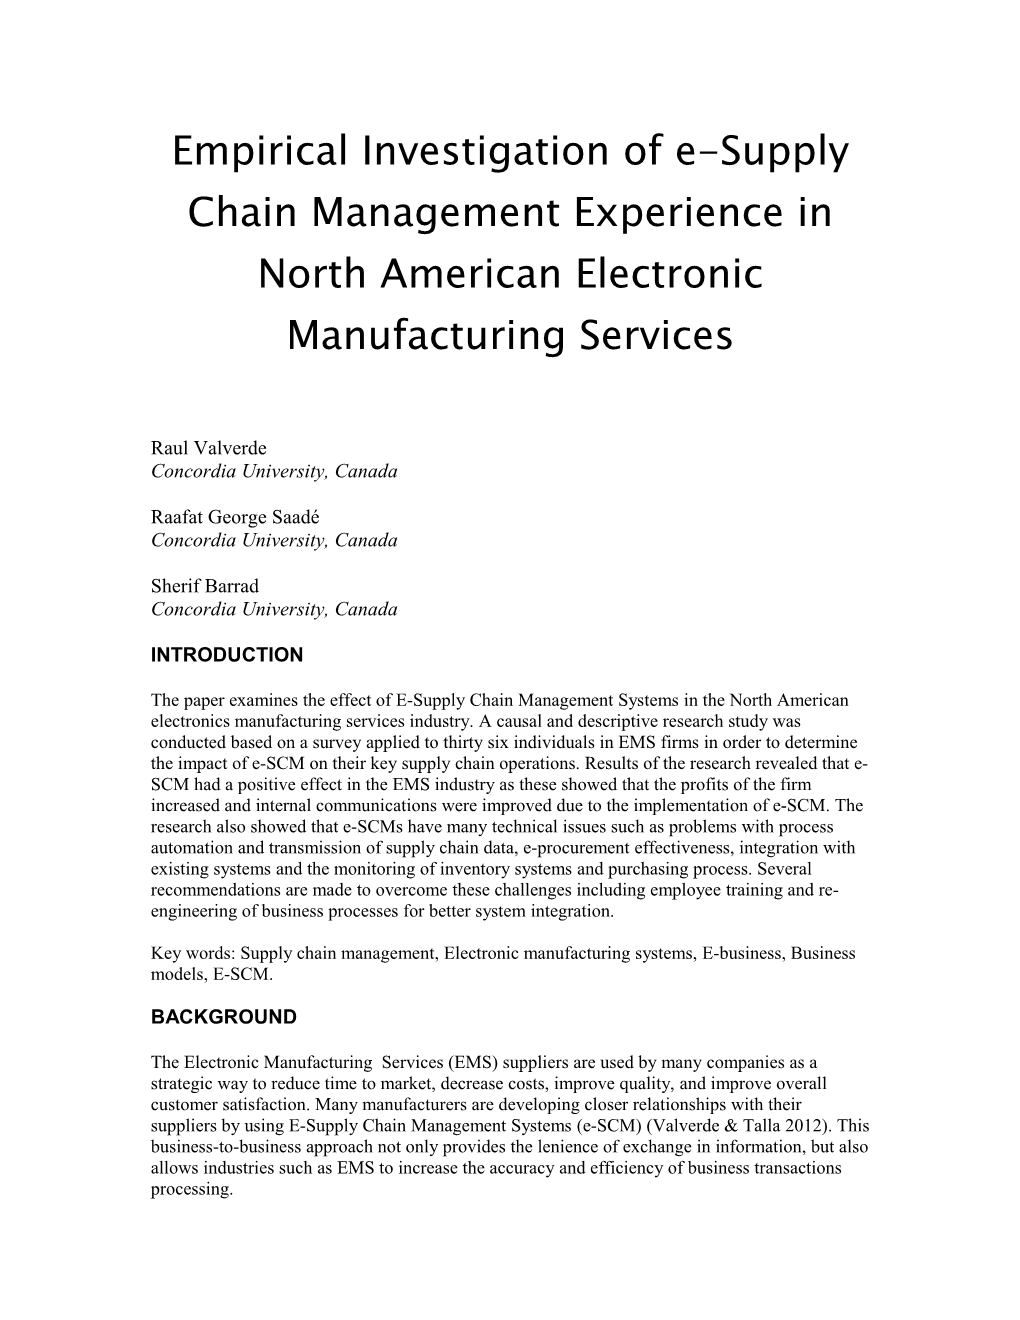 Empirical Investigation of E-Supply Chain Management Experience in North American Electronic